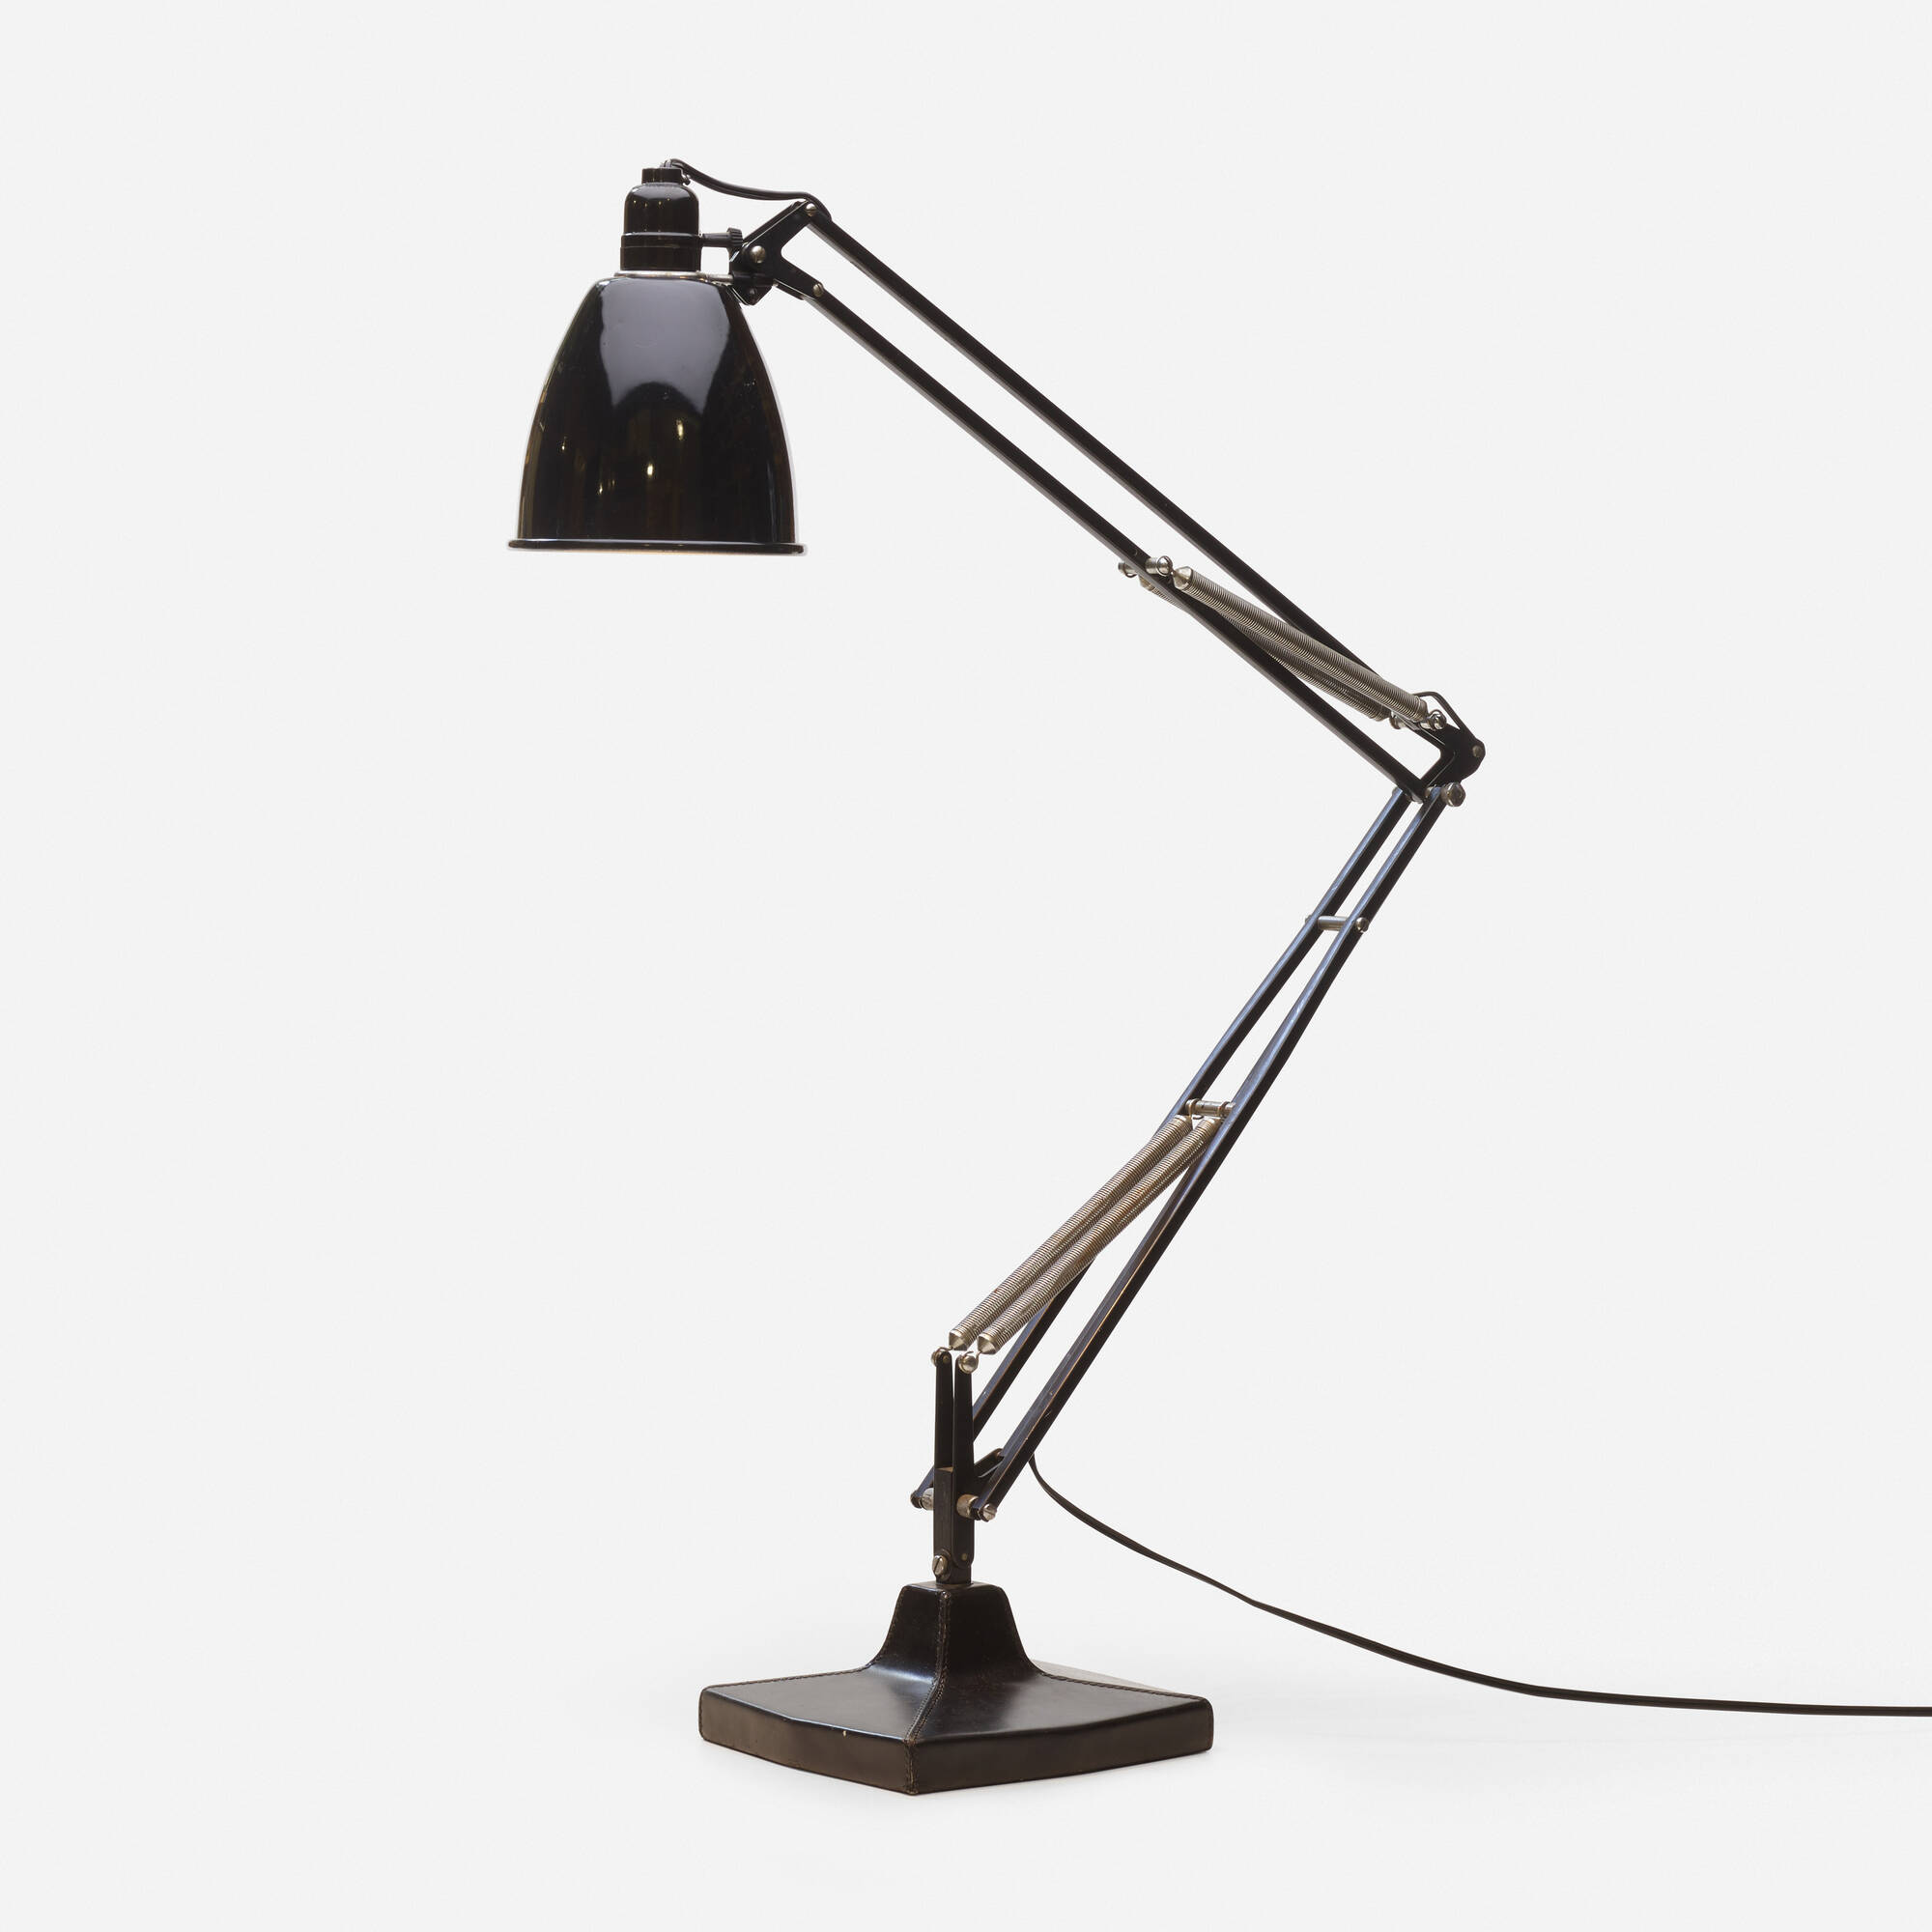 382: CARWARDINE, Anglepoise desk lamp < Design, 10 < Auctions | Wright: of Art and Design